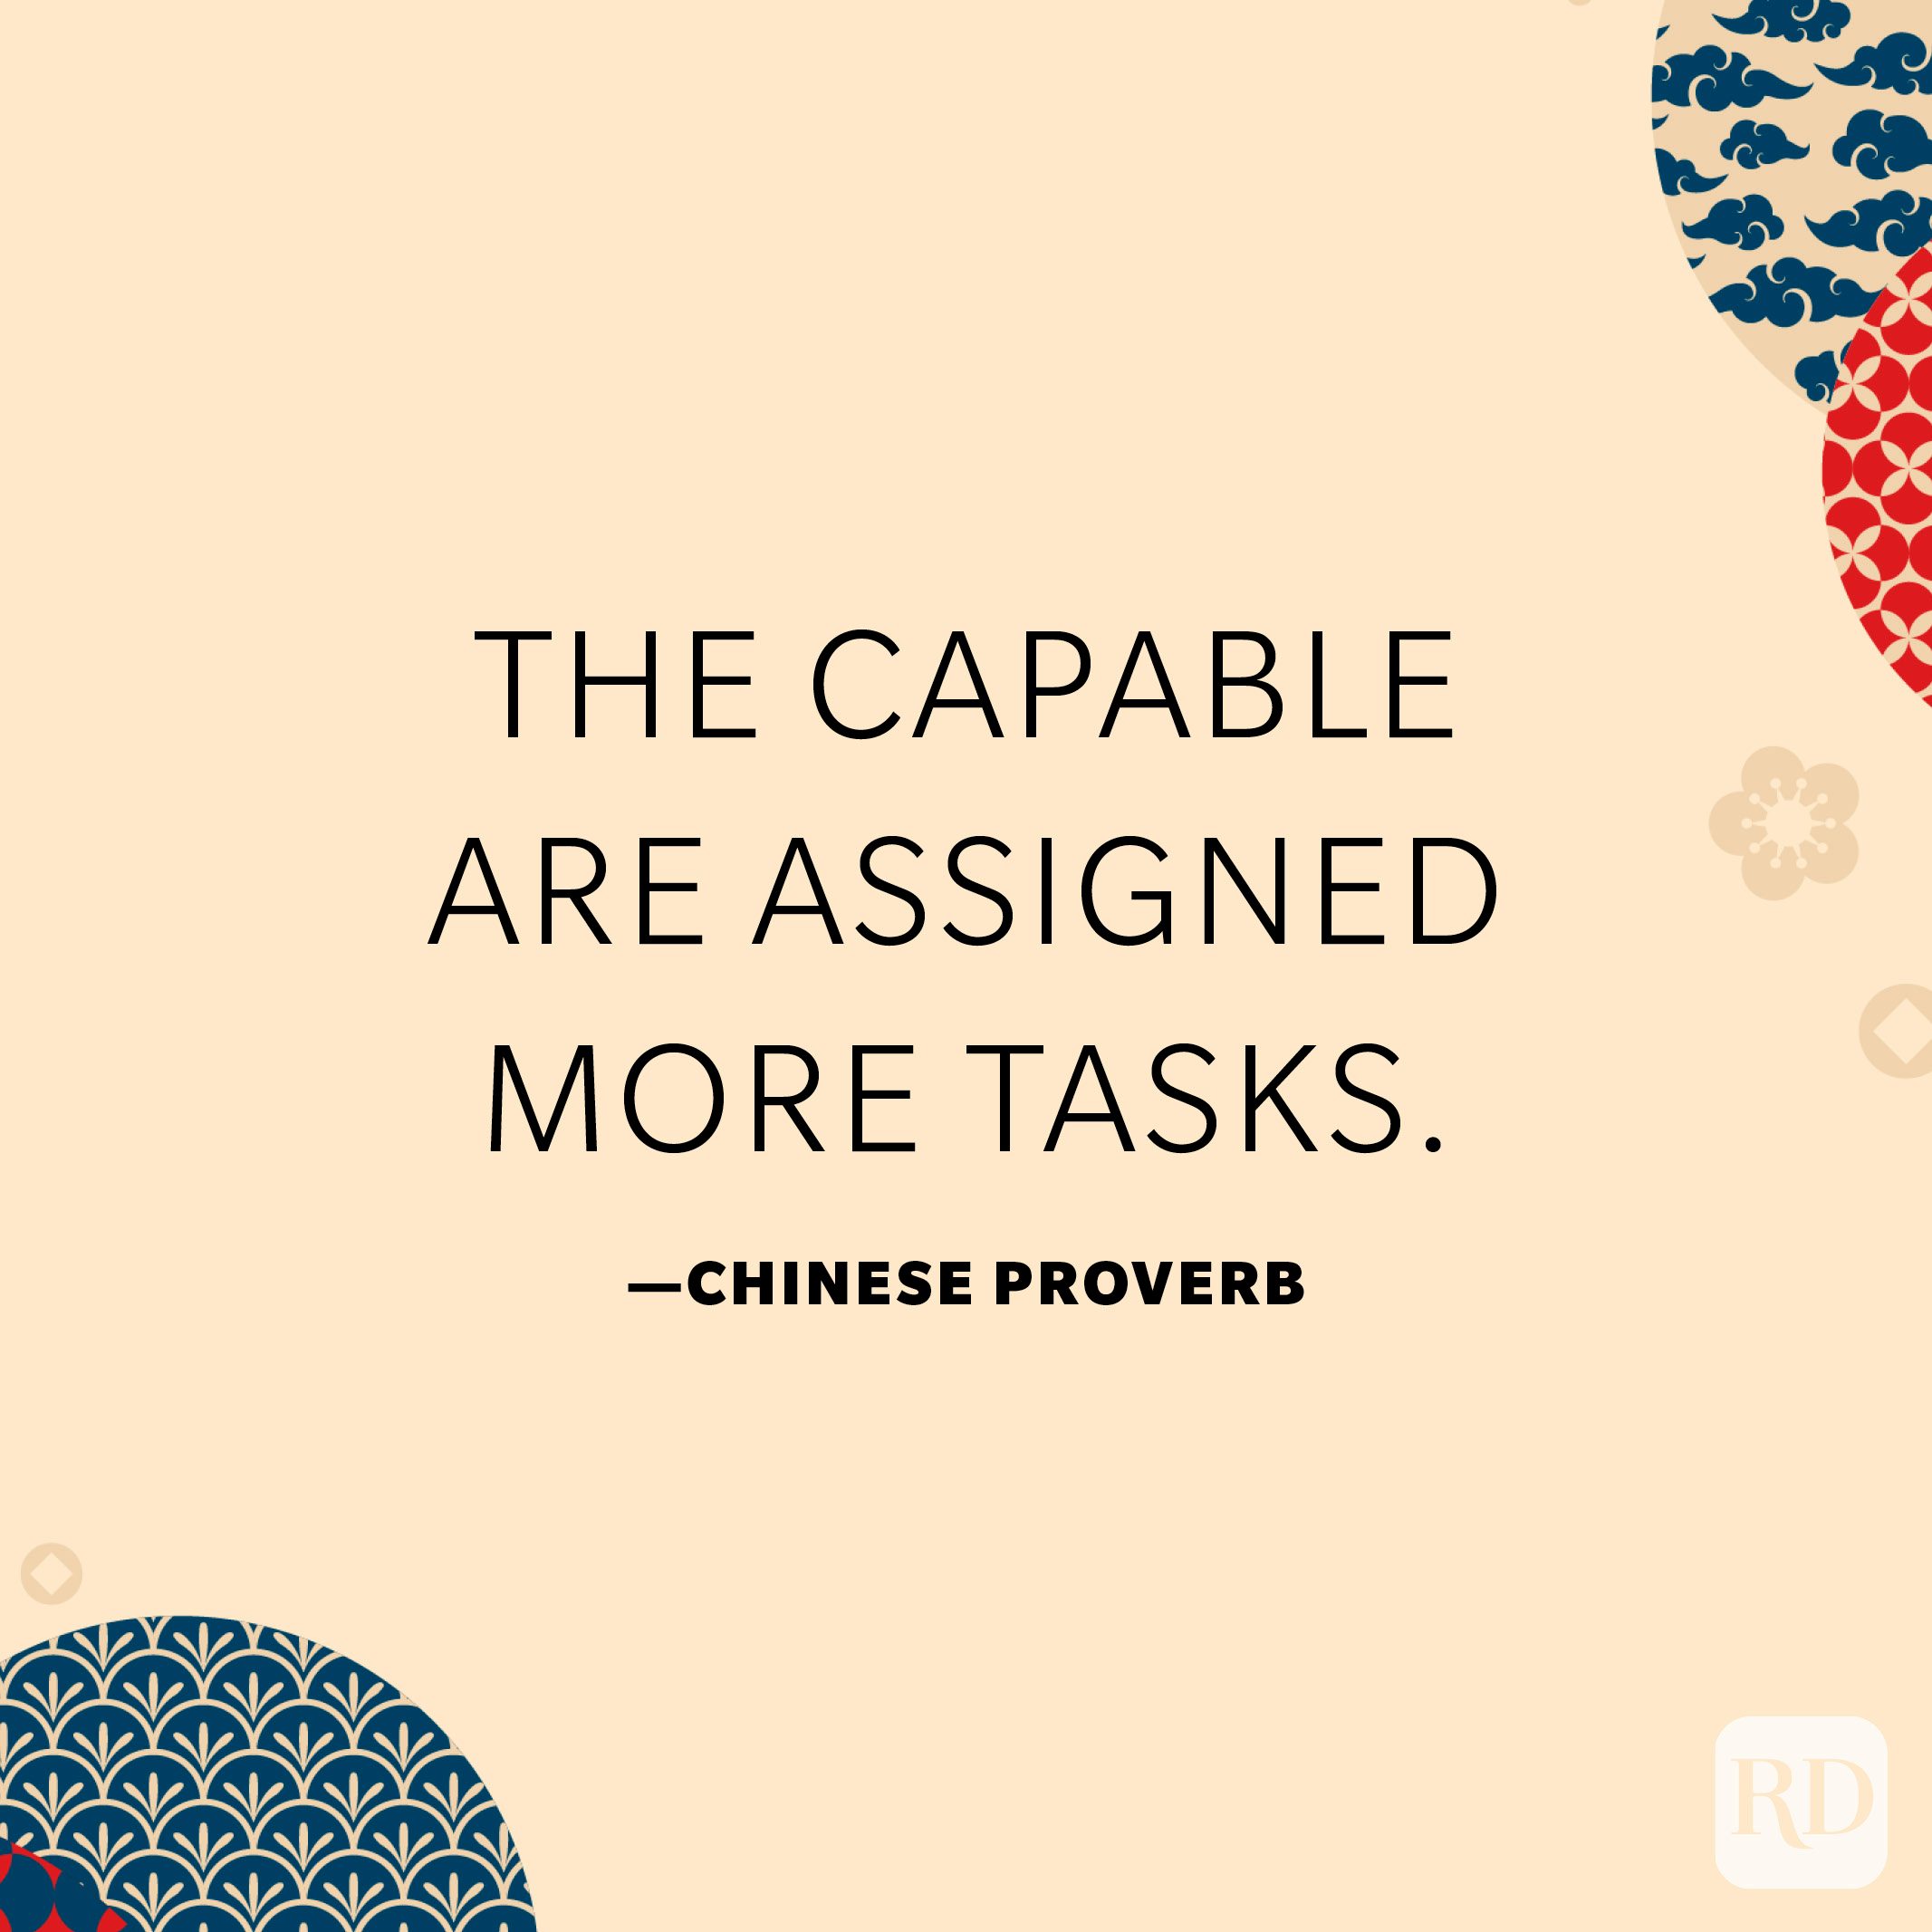 The capable are assigned more tasks